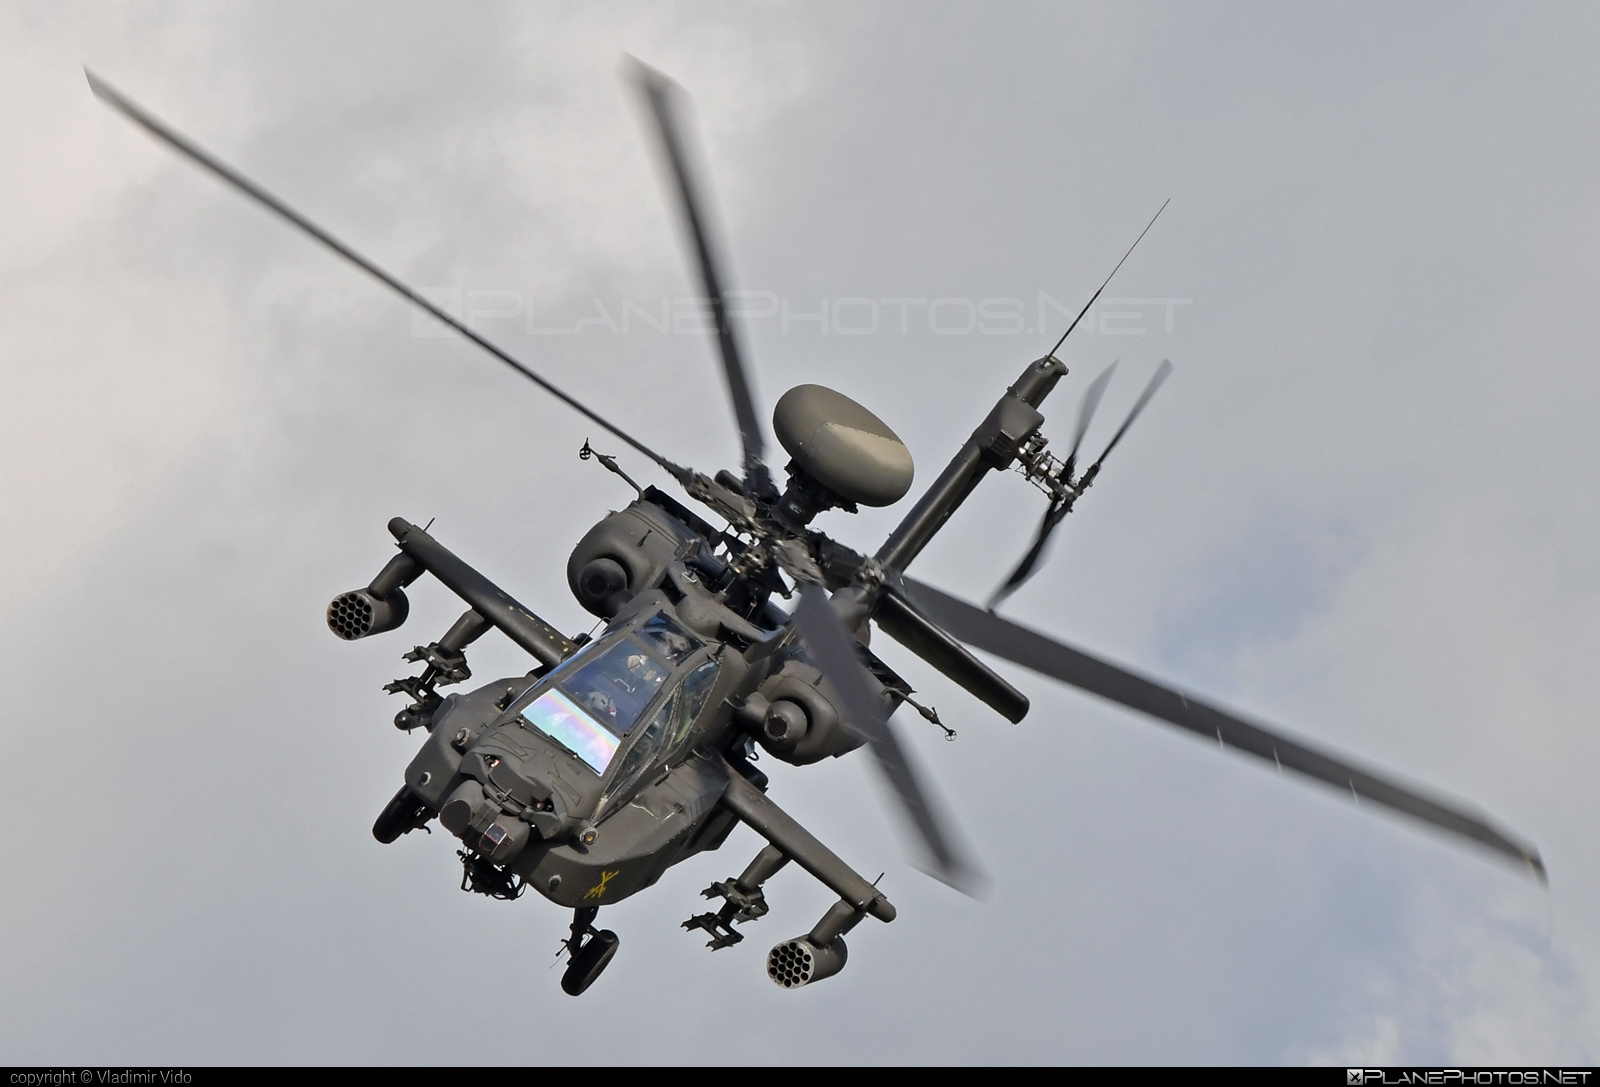 Boeing AH-64E Apache Guardian - 20-03334 operated by US Army #ah64 #ah64apache #ah64e #ah64eapache #ah64eapacheguardian #apacheguardian #boeing #siaf2023 #usarmy